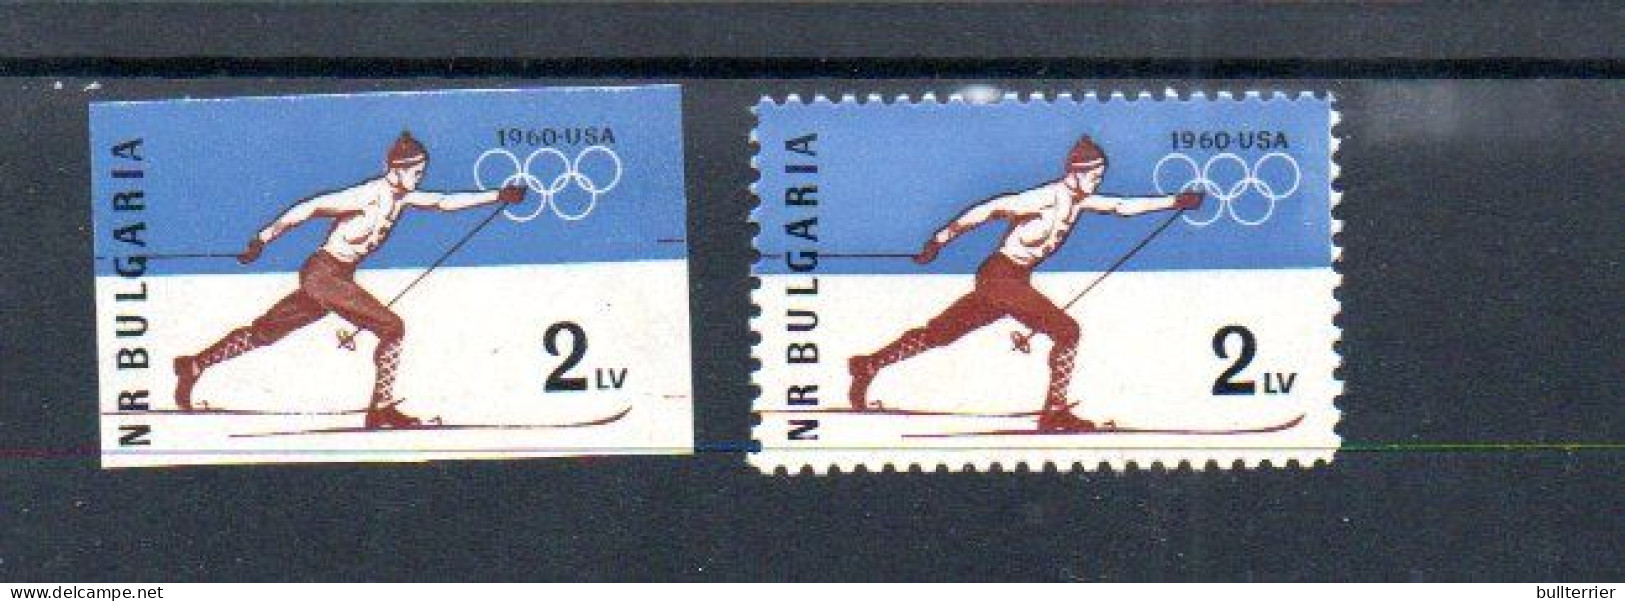 BULGARIA - 1960 - WINTER OLYMPICS PERF & IMPERF  MINT NEVER HINGED - Nuevos